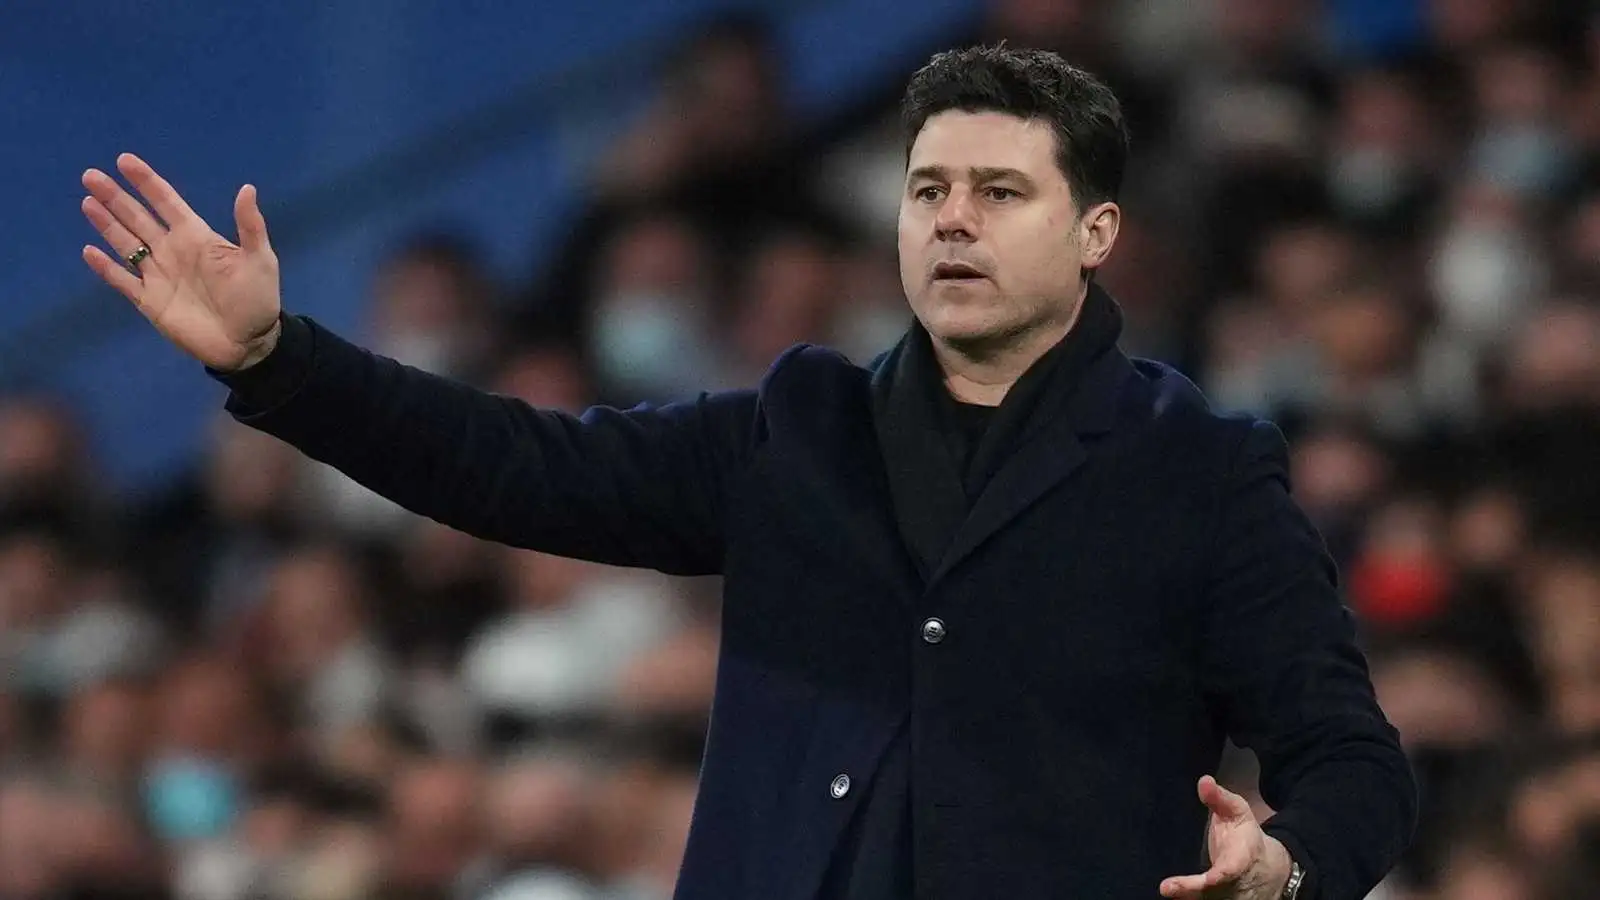 Pochettino tipped to join surprise team after Man Utd snub, with PSG sack imminent